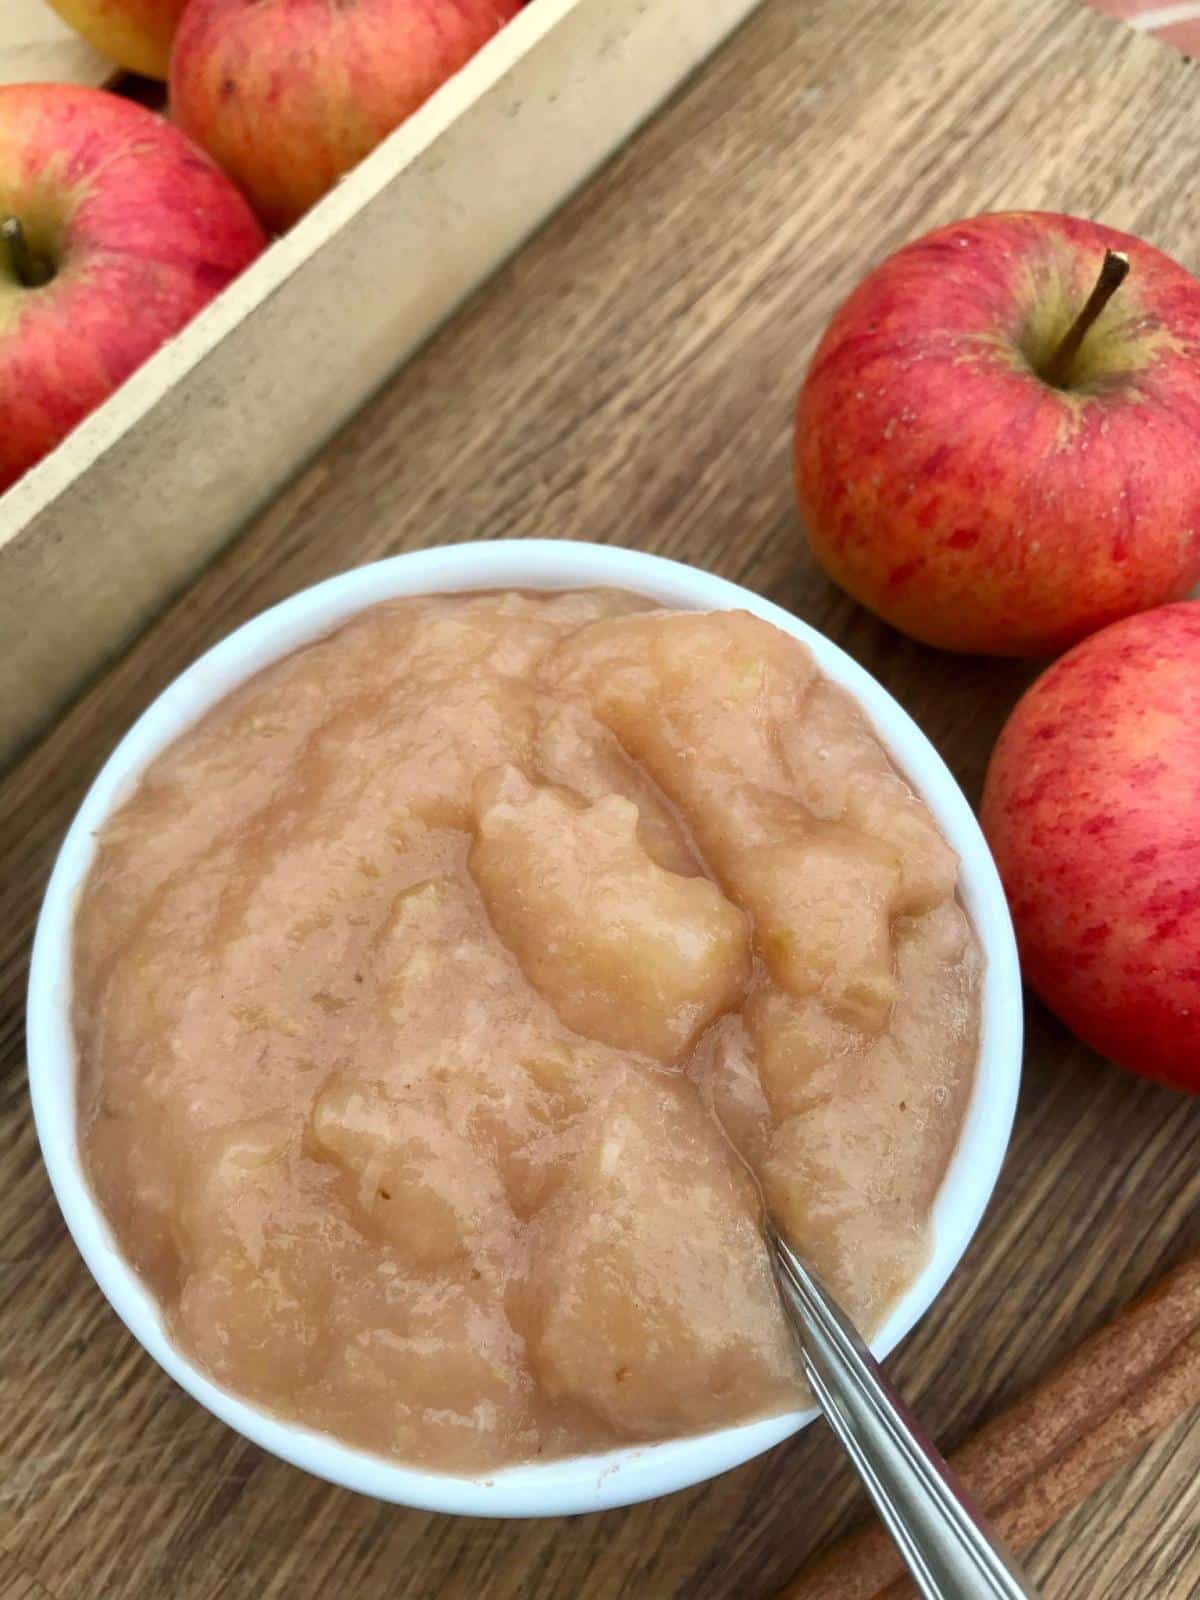 Bowl of unsweetened slow cooker apple puree with apples.